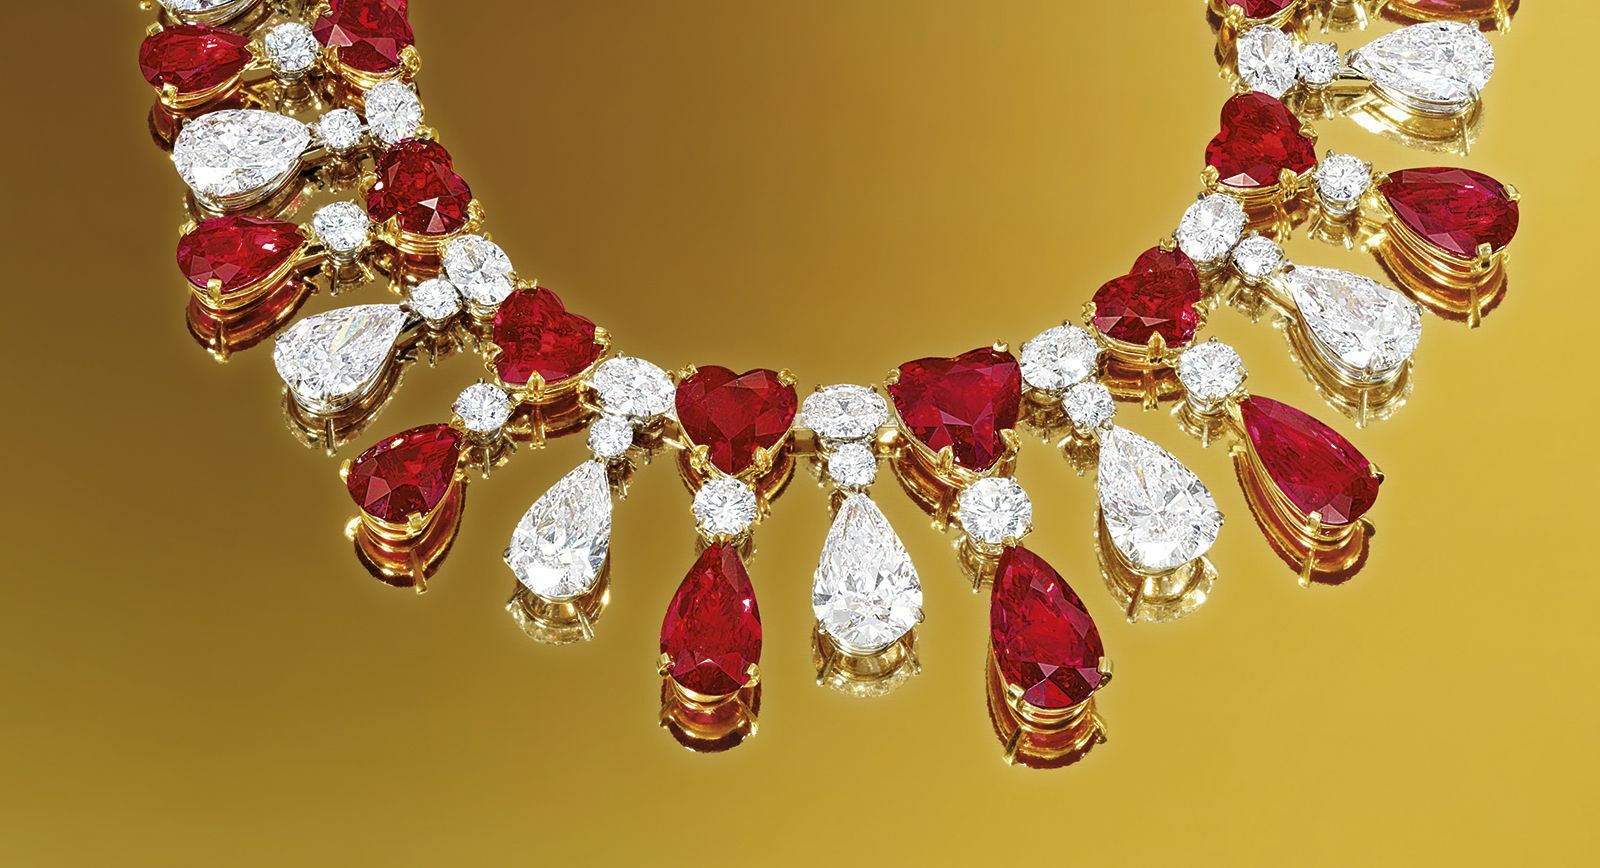 Ruby and diamond necklace by James W Currens for Faidee